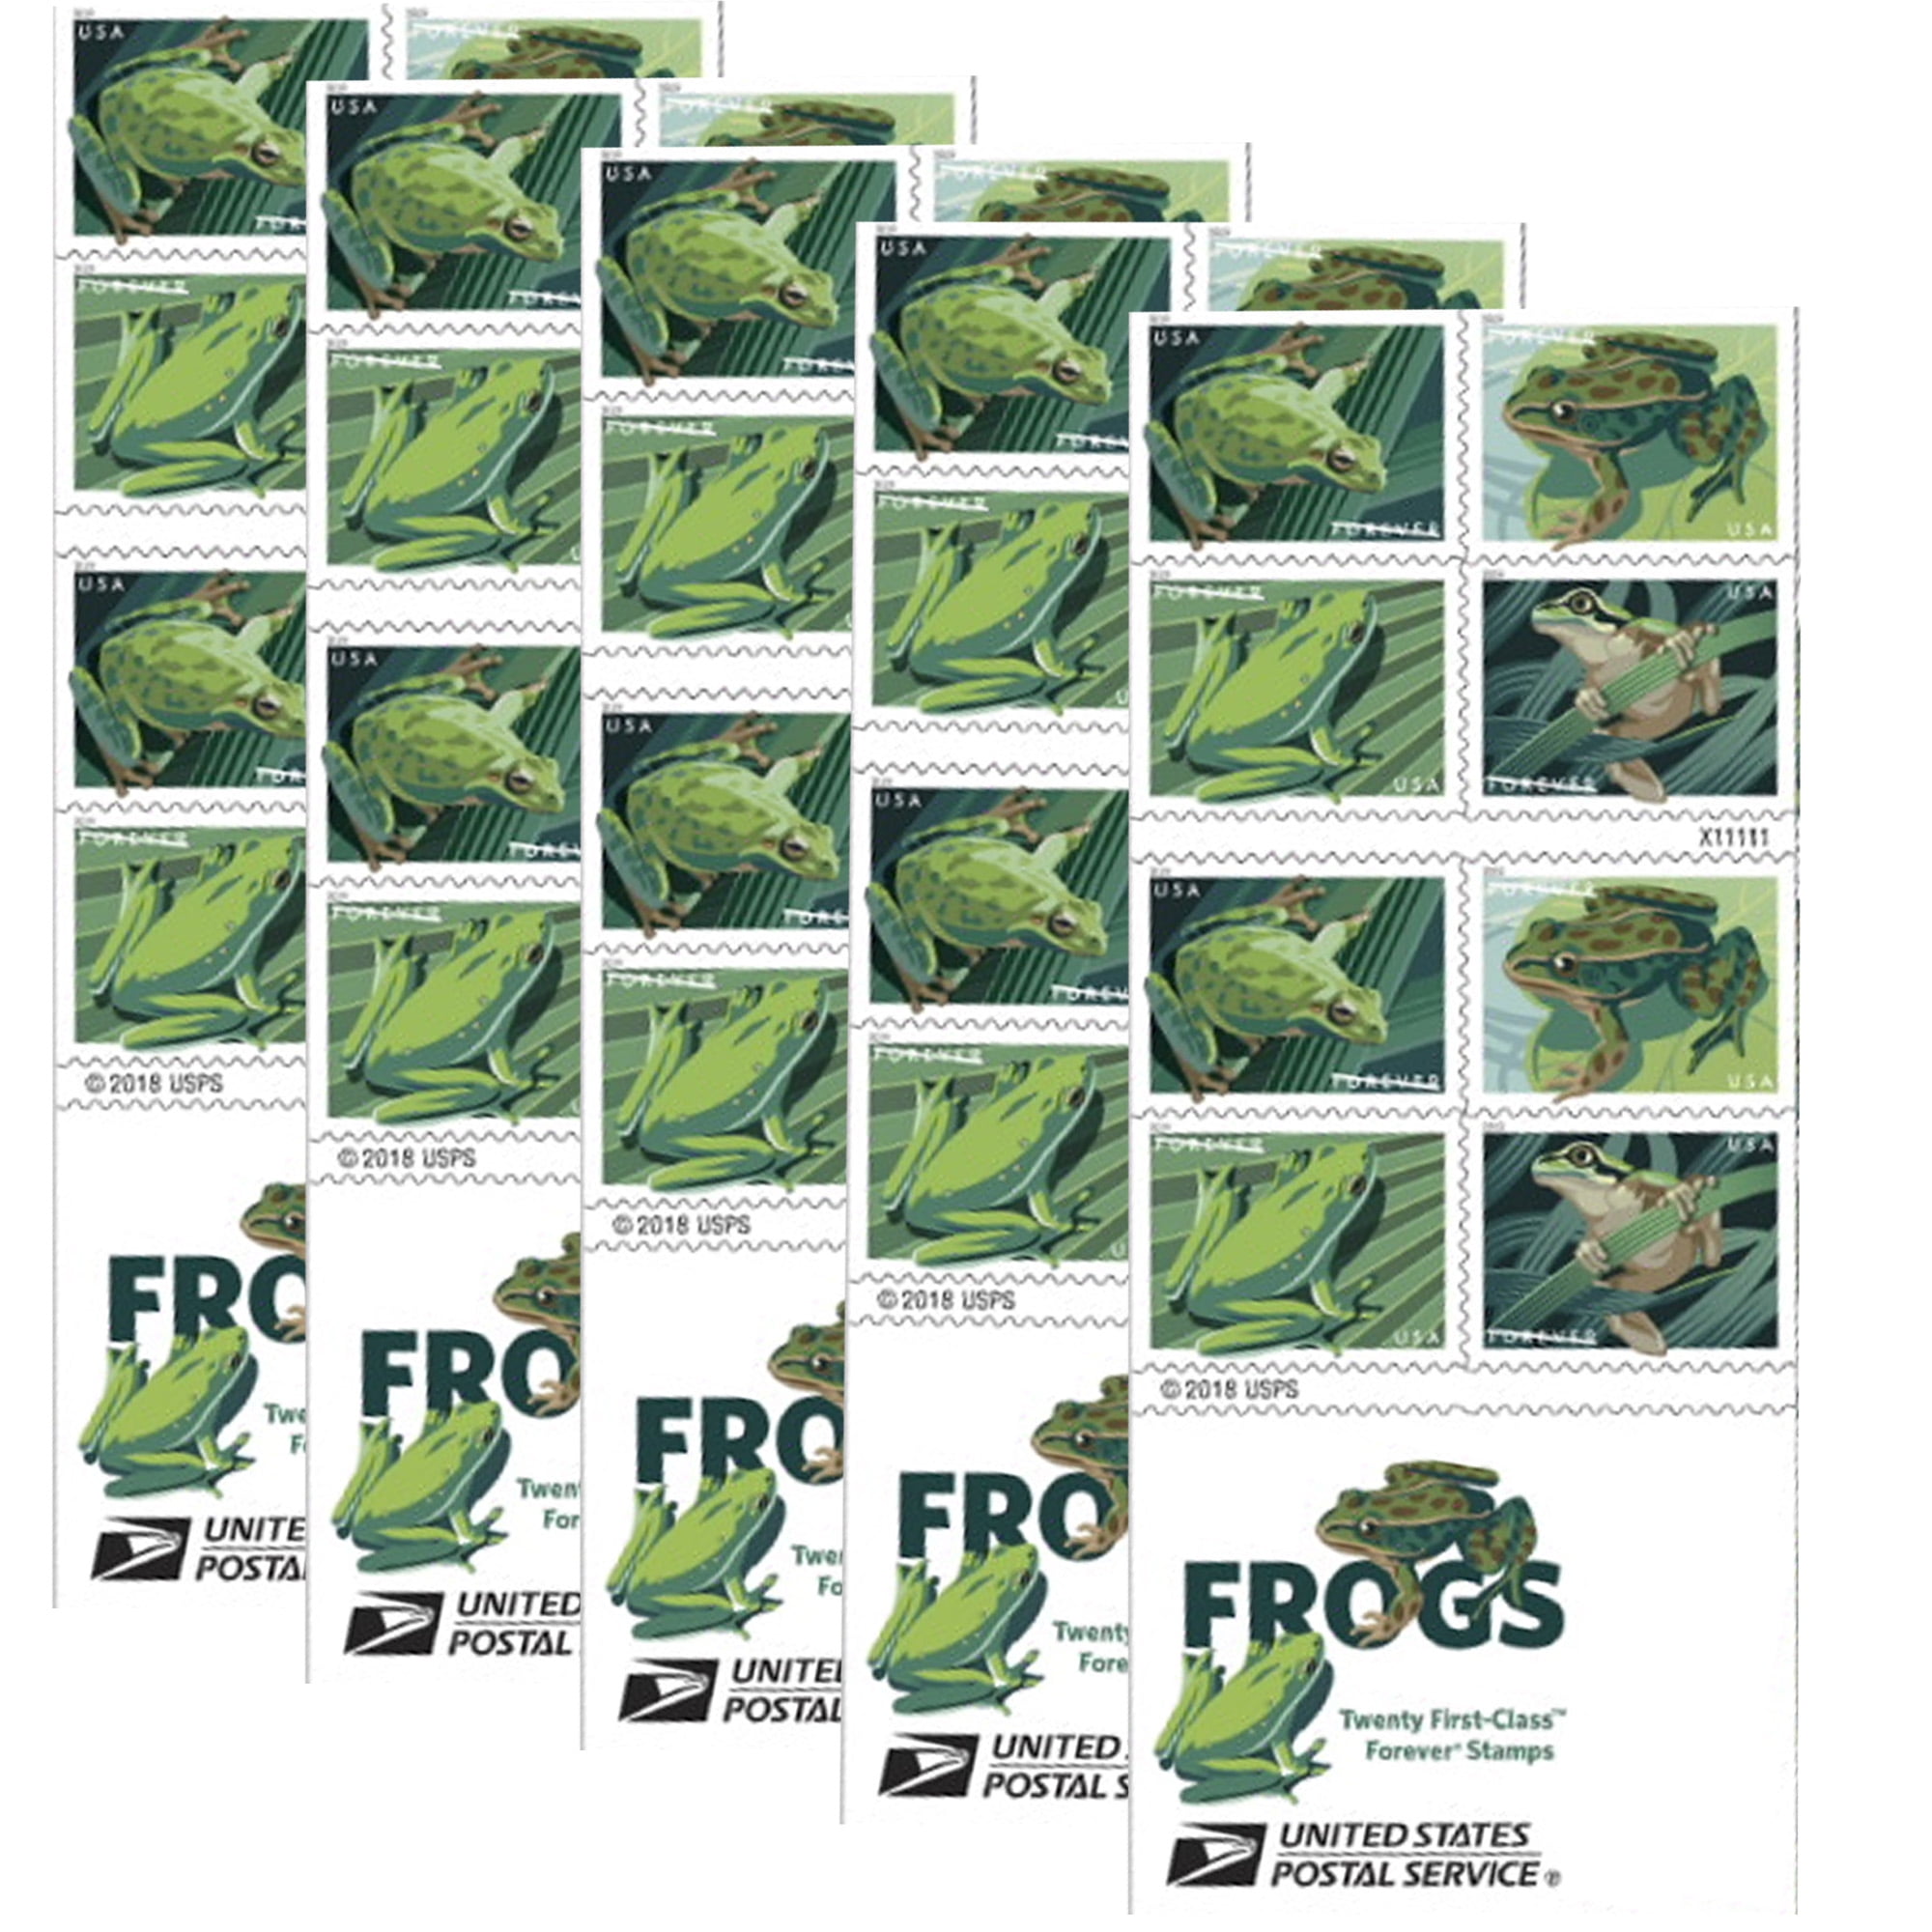 Frogs Forever Postage Stamps - Celebrate Nature with these Colorful Stamps